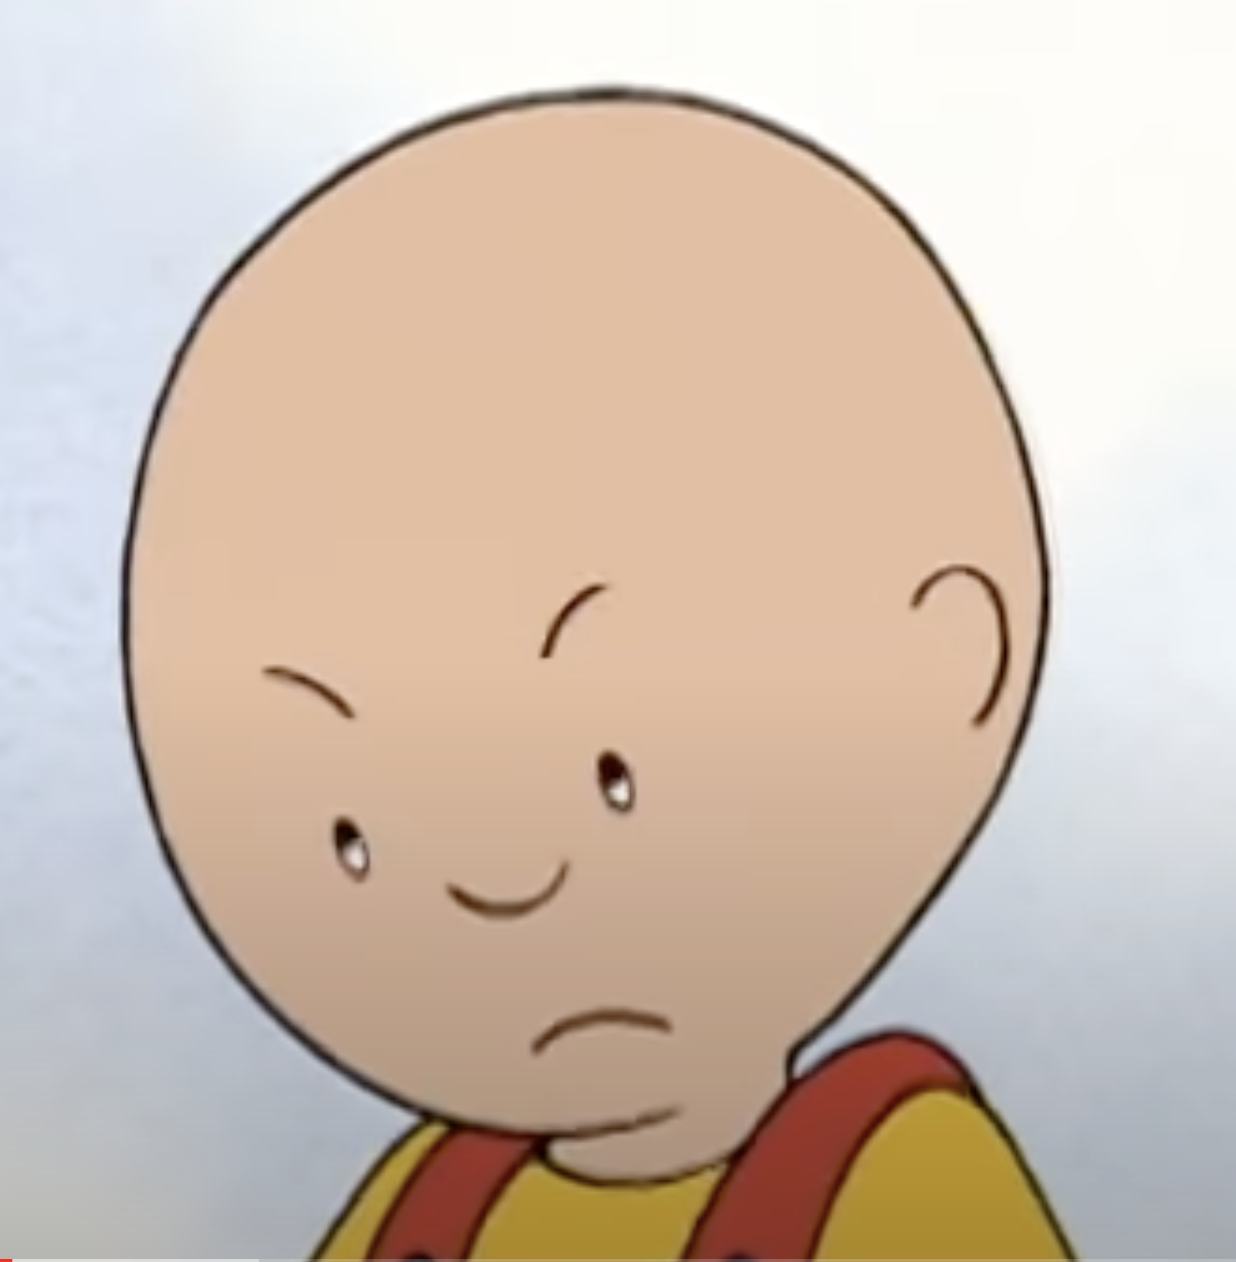 Caillou frowns angrily.